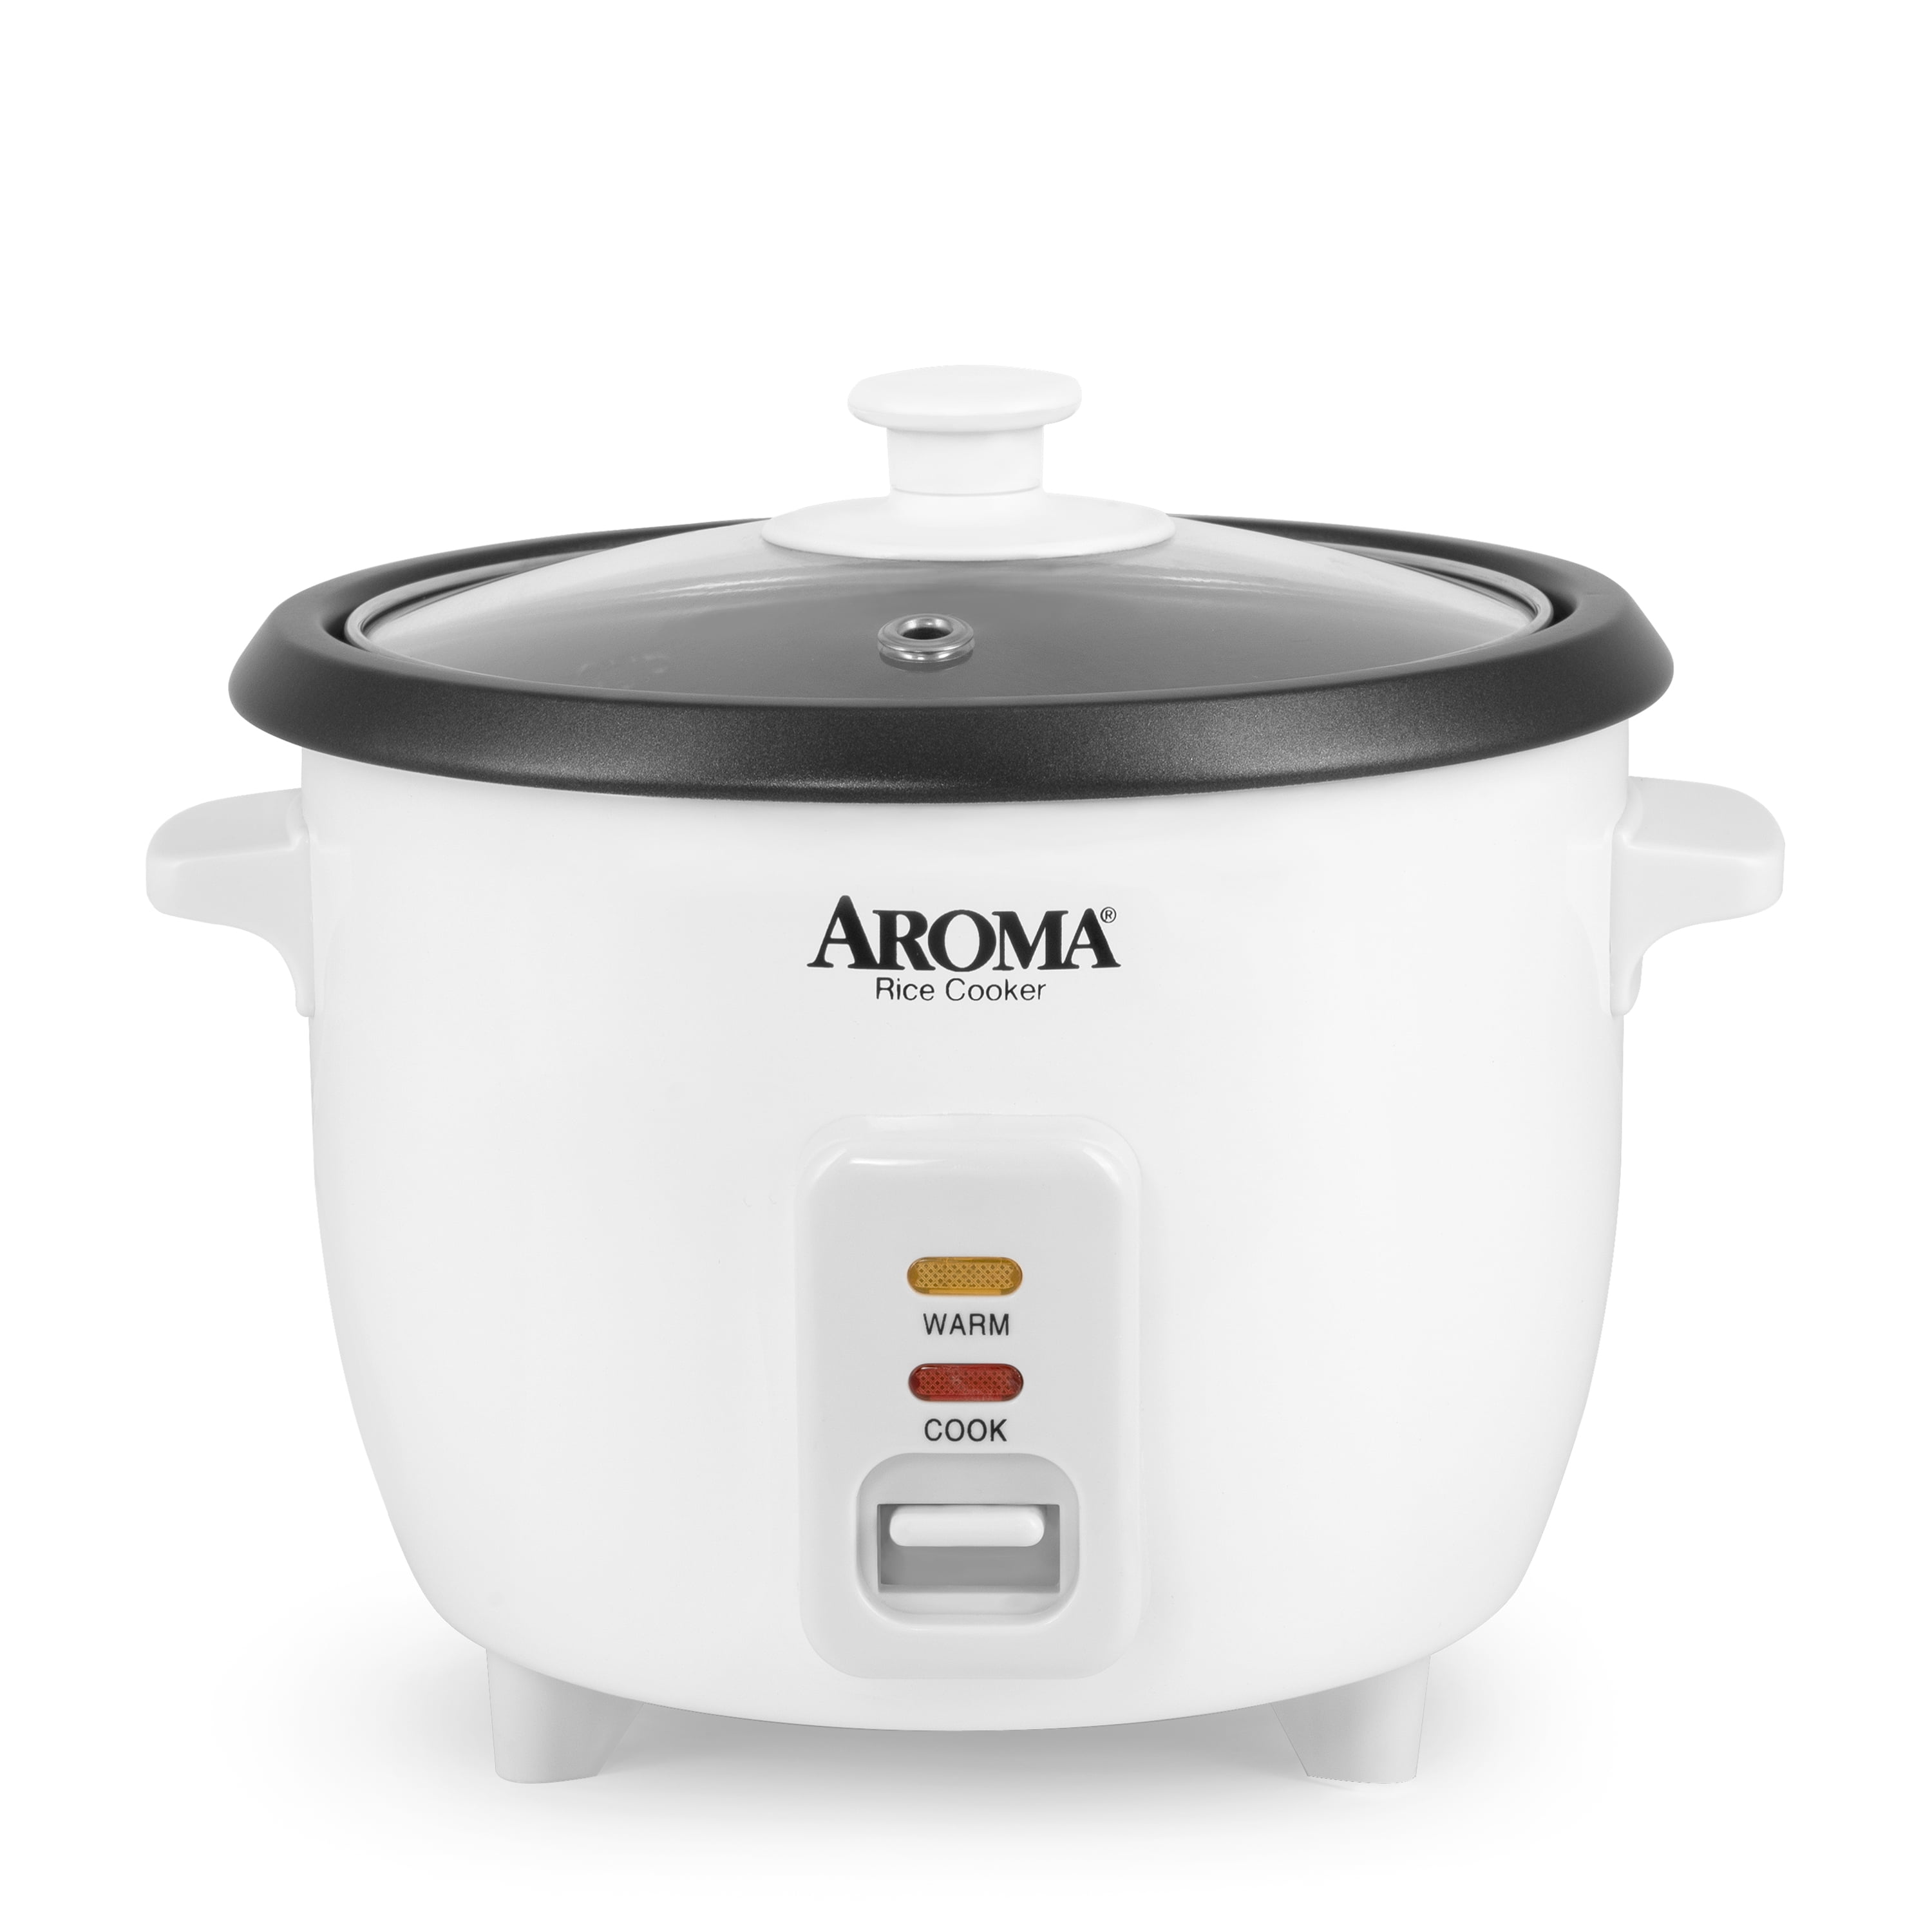 Aroma ARC-1126SBL SmartCarb Rice Cooker: 6 cup, multi-function